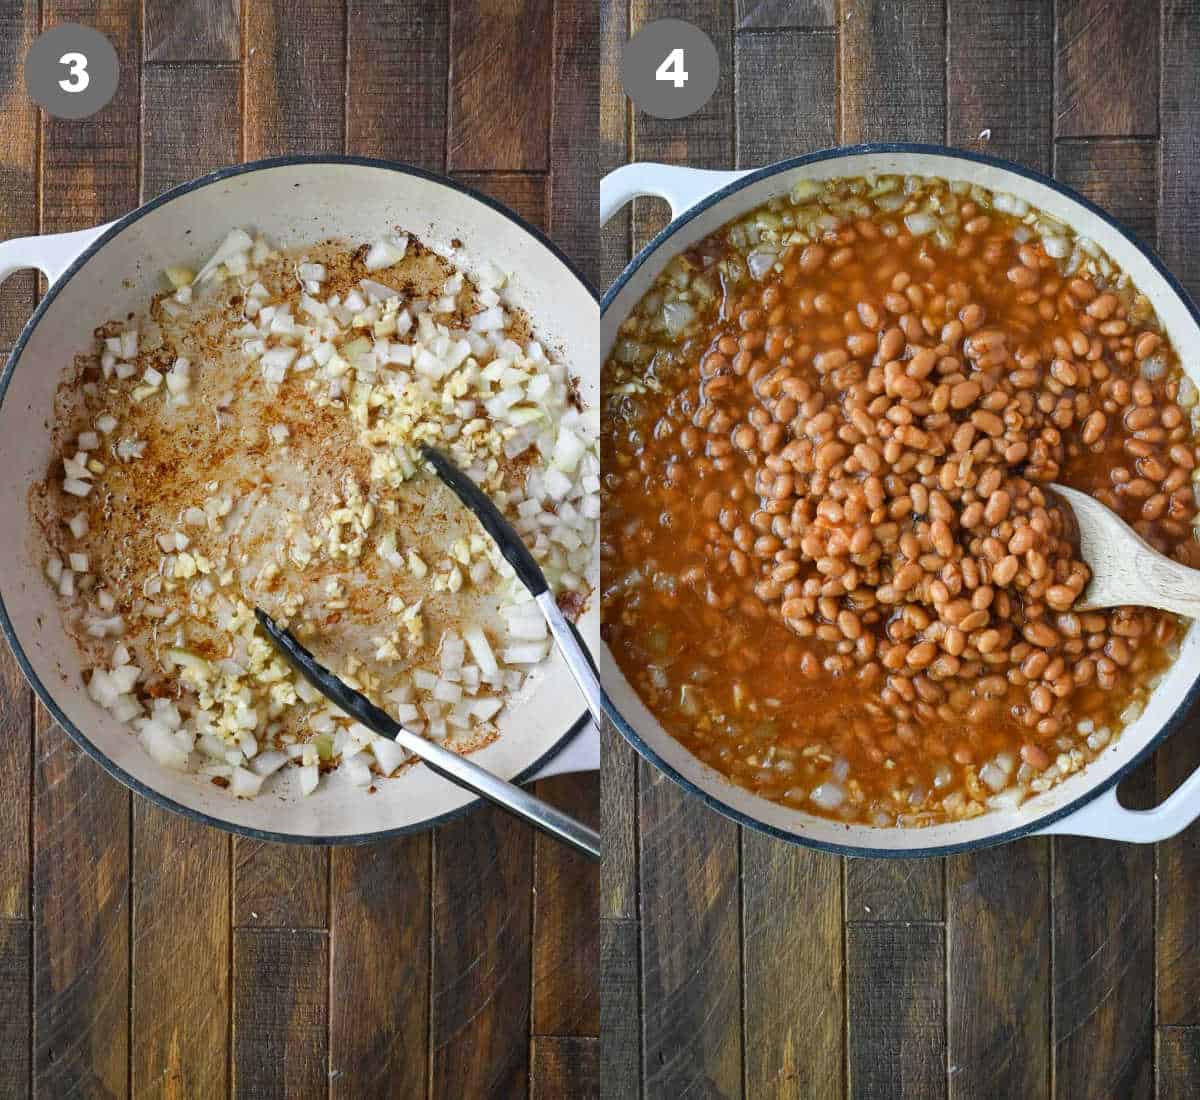 Diced onions sauteed in a skillet with garlic then beans added in.